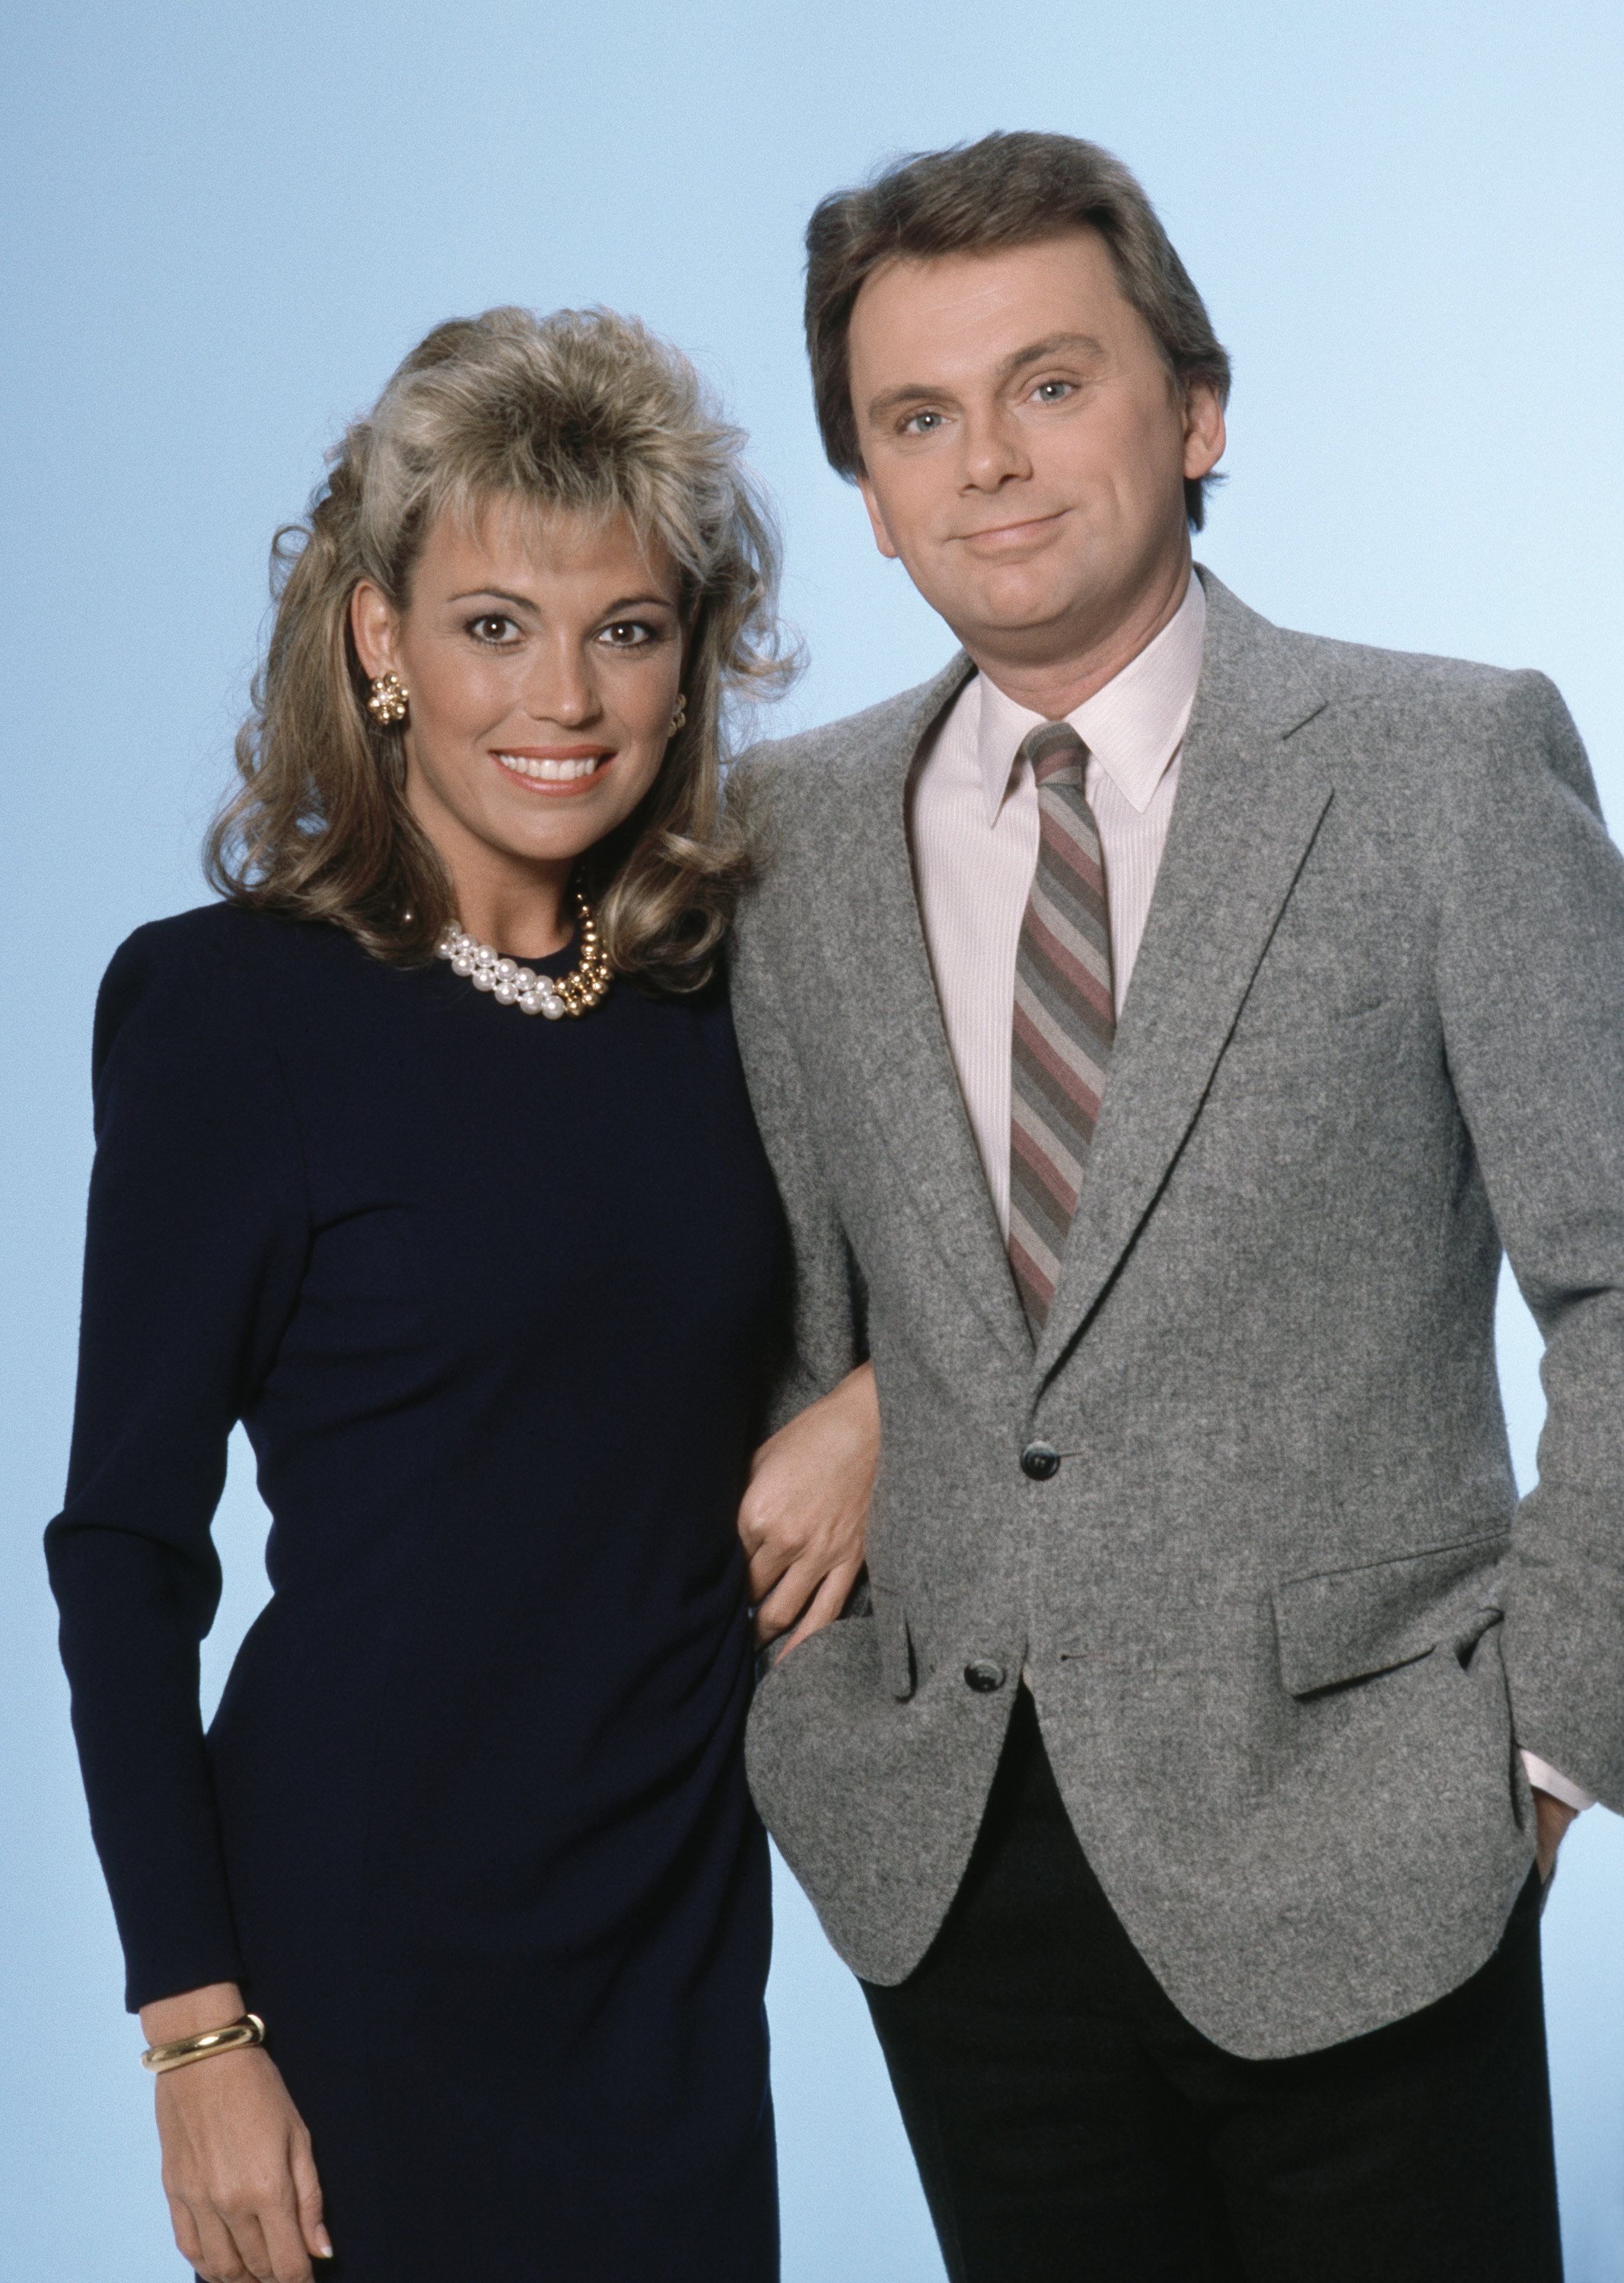 Pat Sajak - no stranger to cutting remarks especially in his sendoff season- has hosted Wheel of Fortune with Vanna White for 41 years